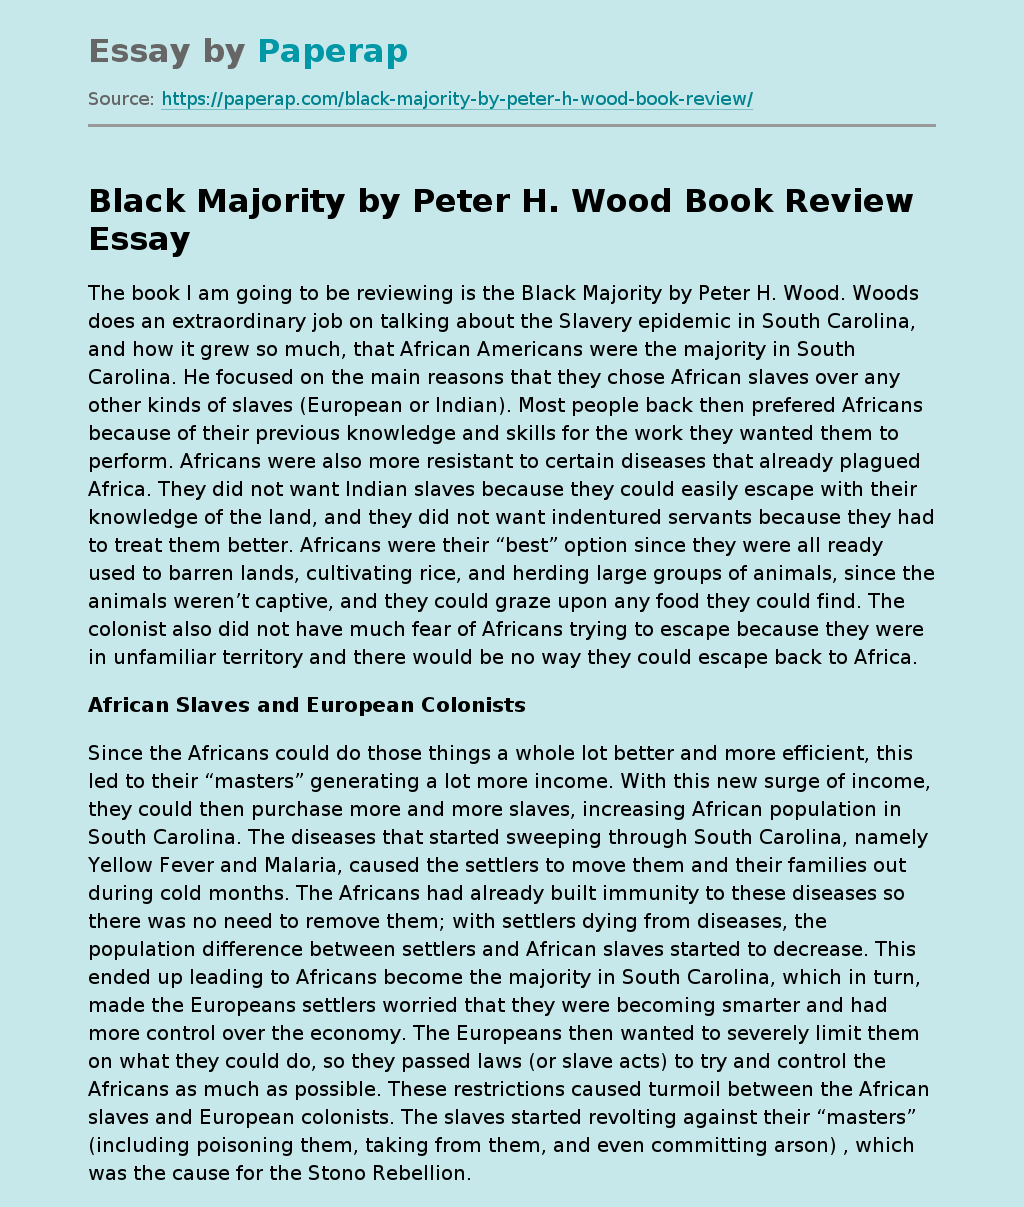 Black Majority by Peter H. Wood Book Review